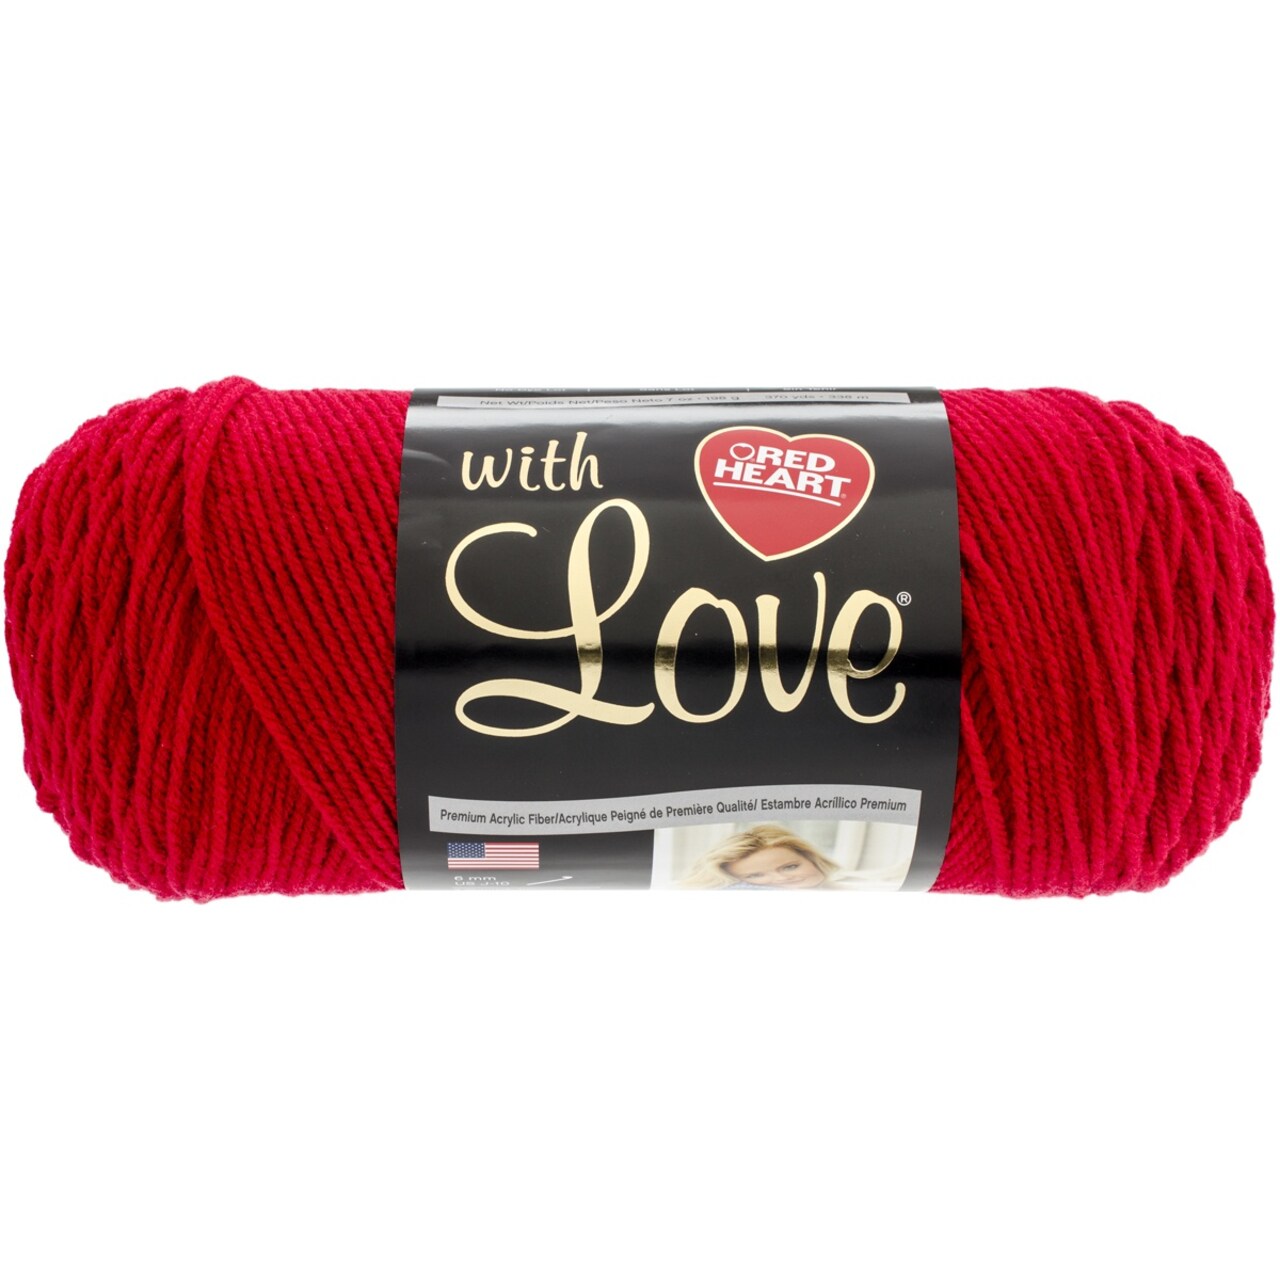 Red Heart With Love Holy Berry Yarn - 3 Pack of 198g/7oz - Acrylic - 4  Medium (Worsted) - 370 Yards - Knitting/Crochet